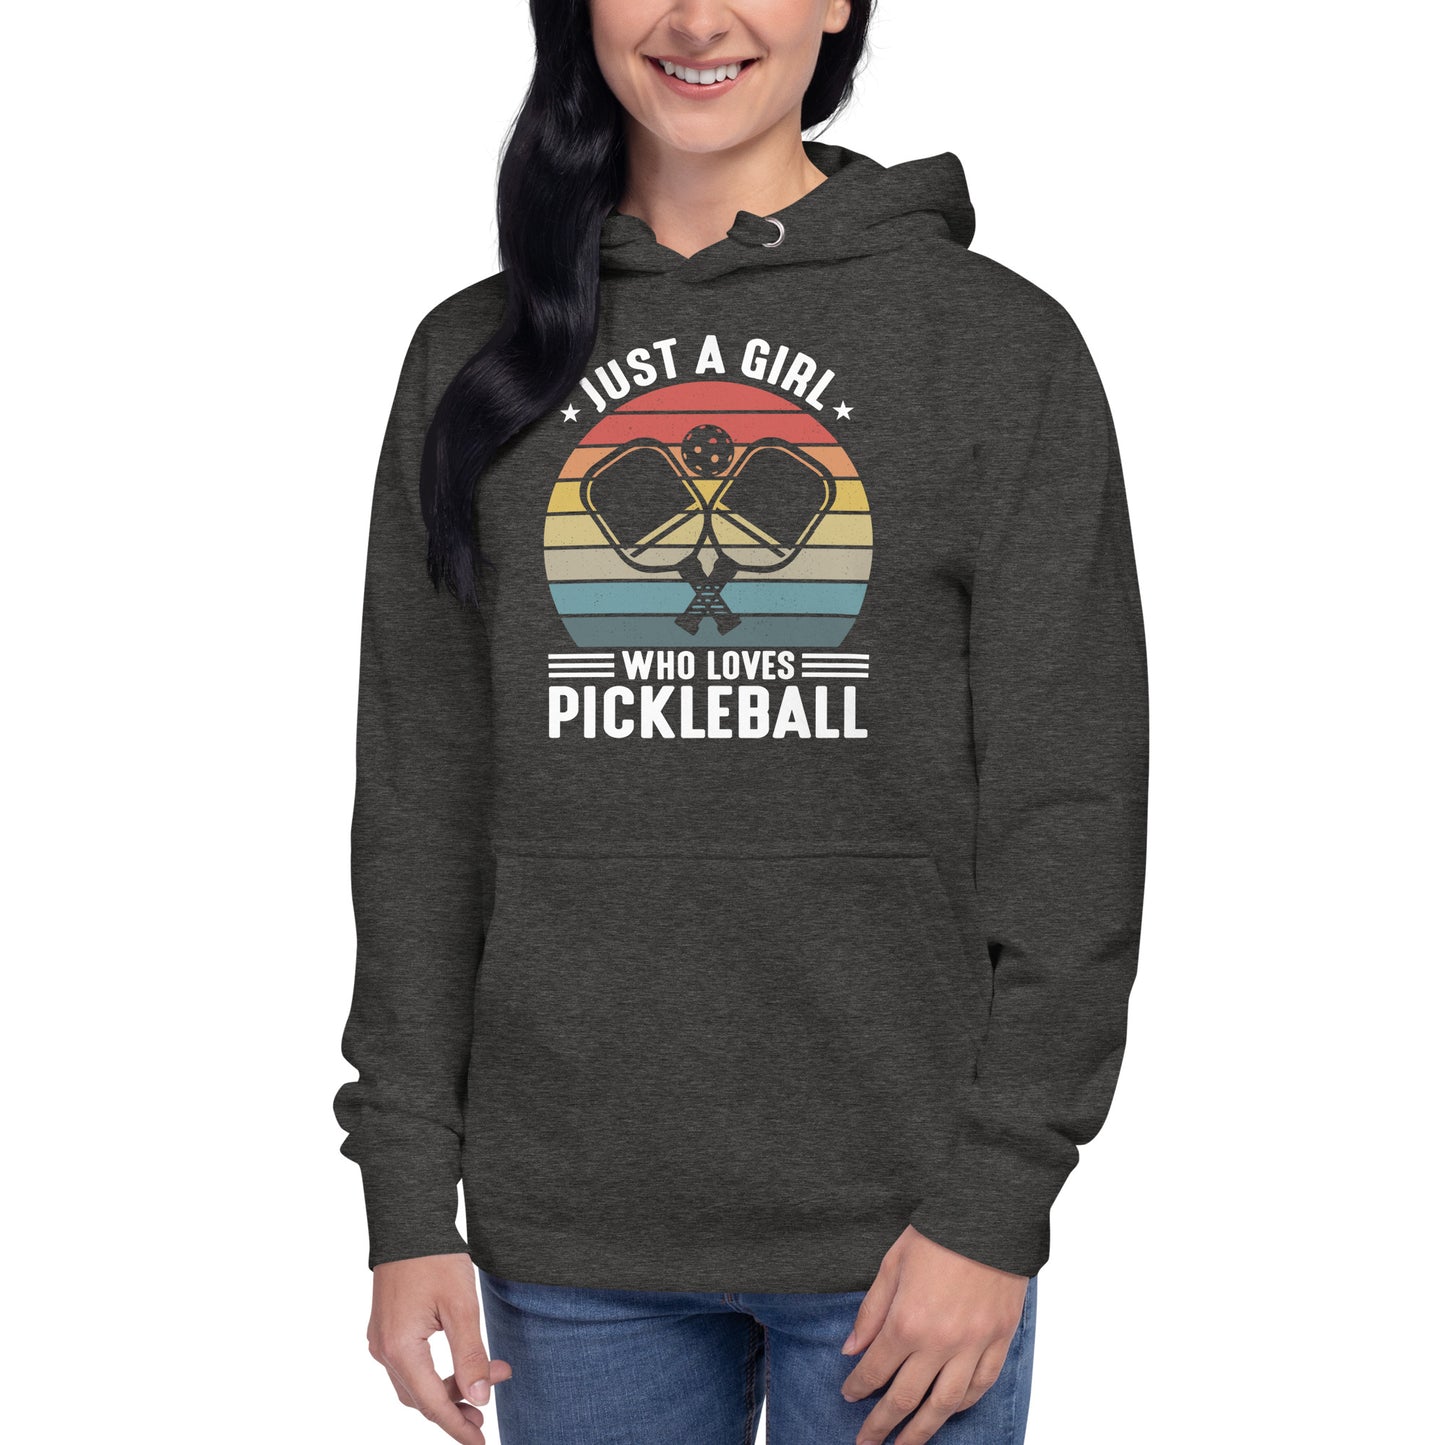 Just a Girl Who Loves Pickleball Hoodie